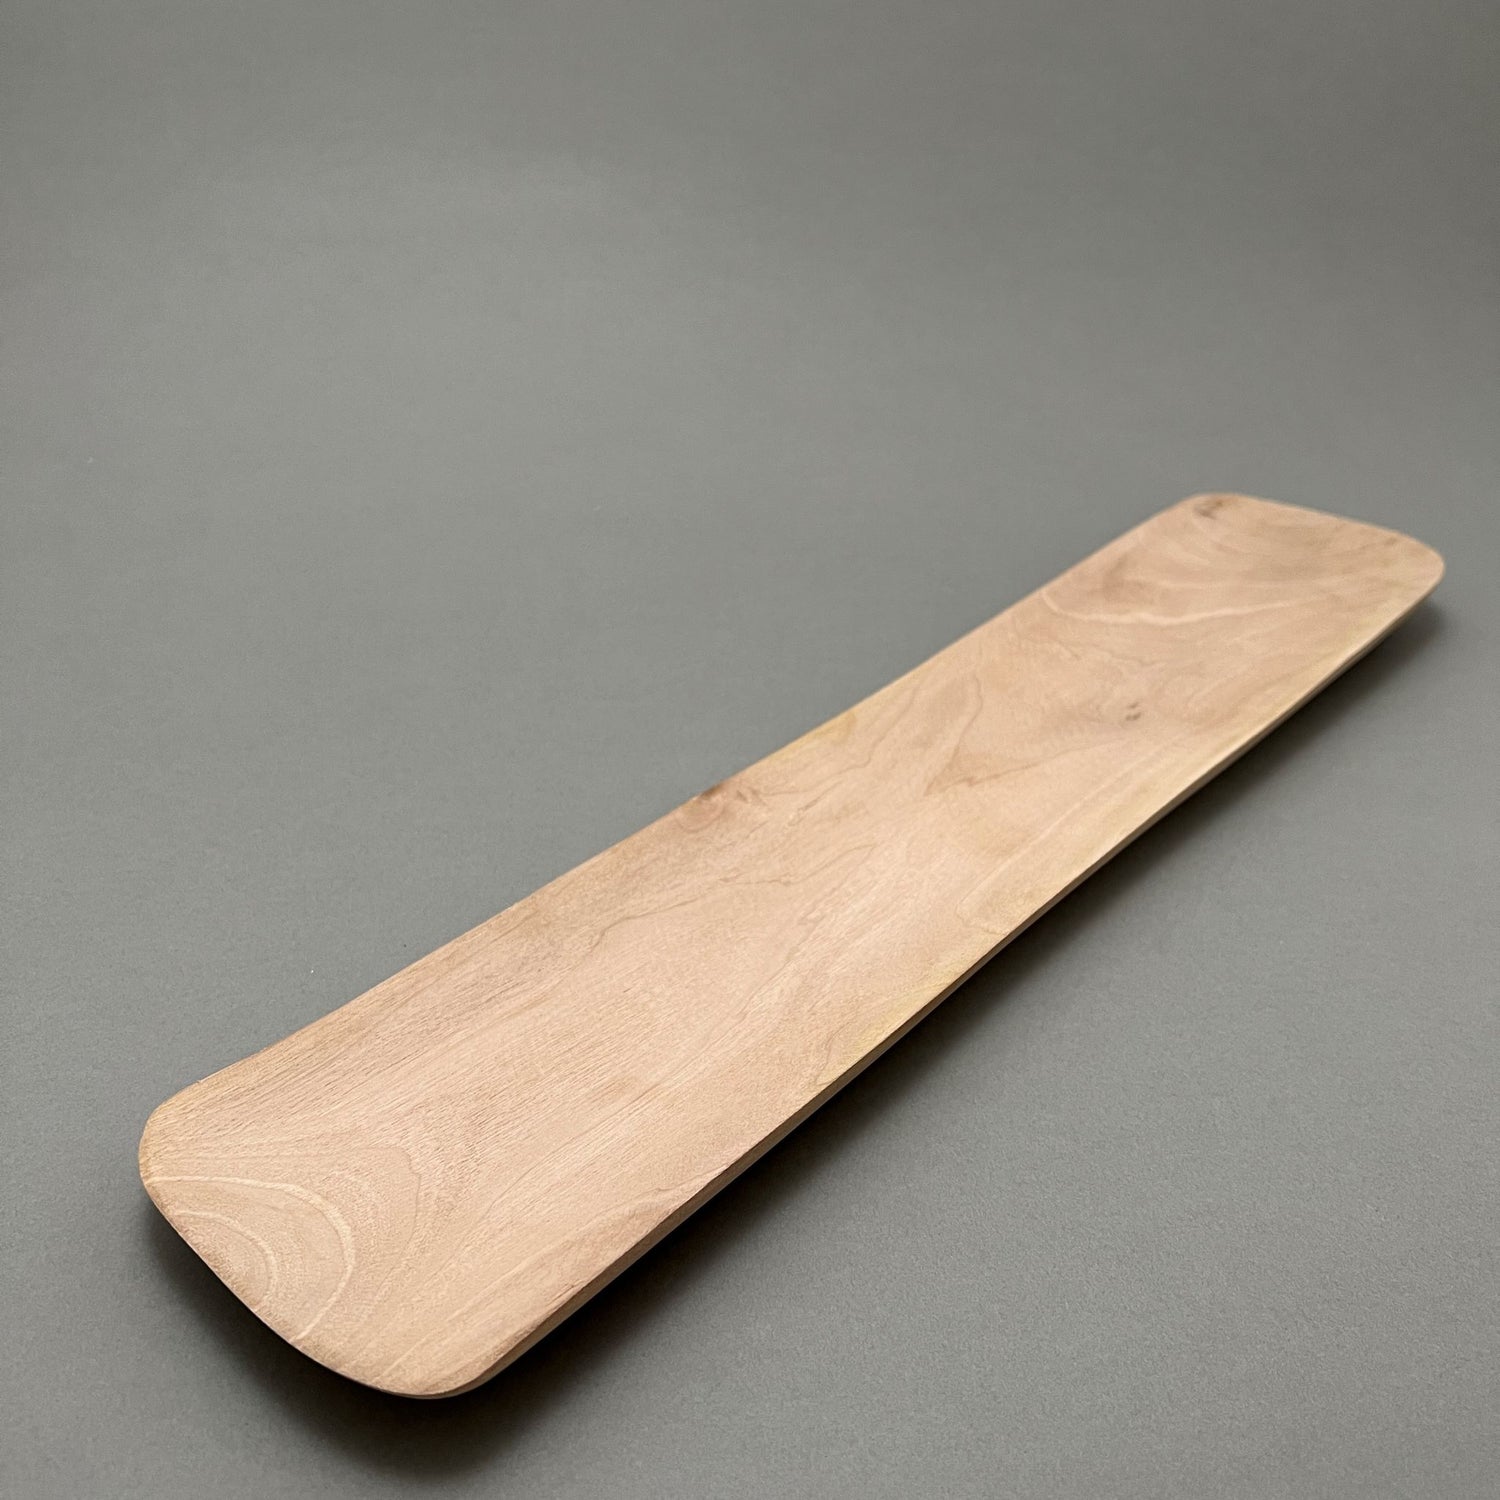 An oblong wooden tray laying on a gray background